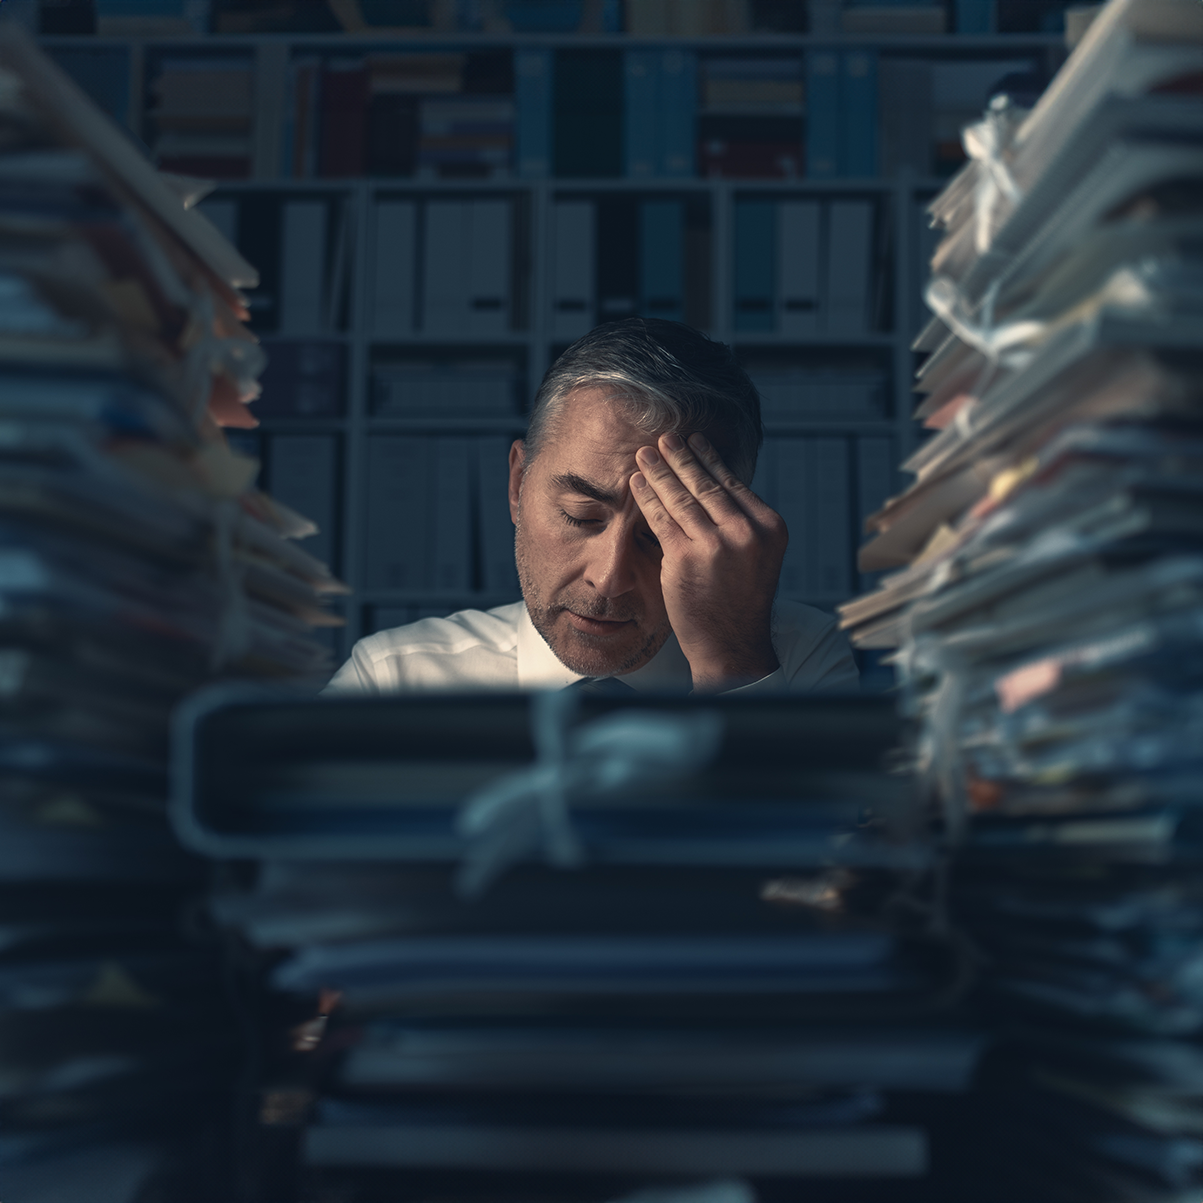 Stressed businessman with piles of paperwork in a cluttered office.